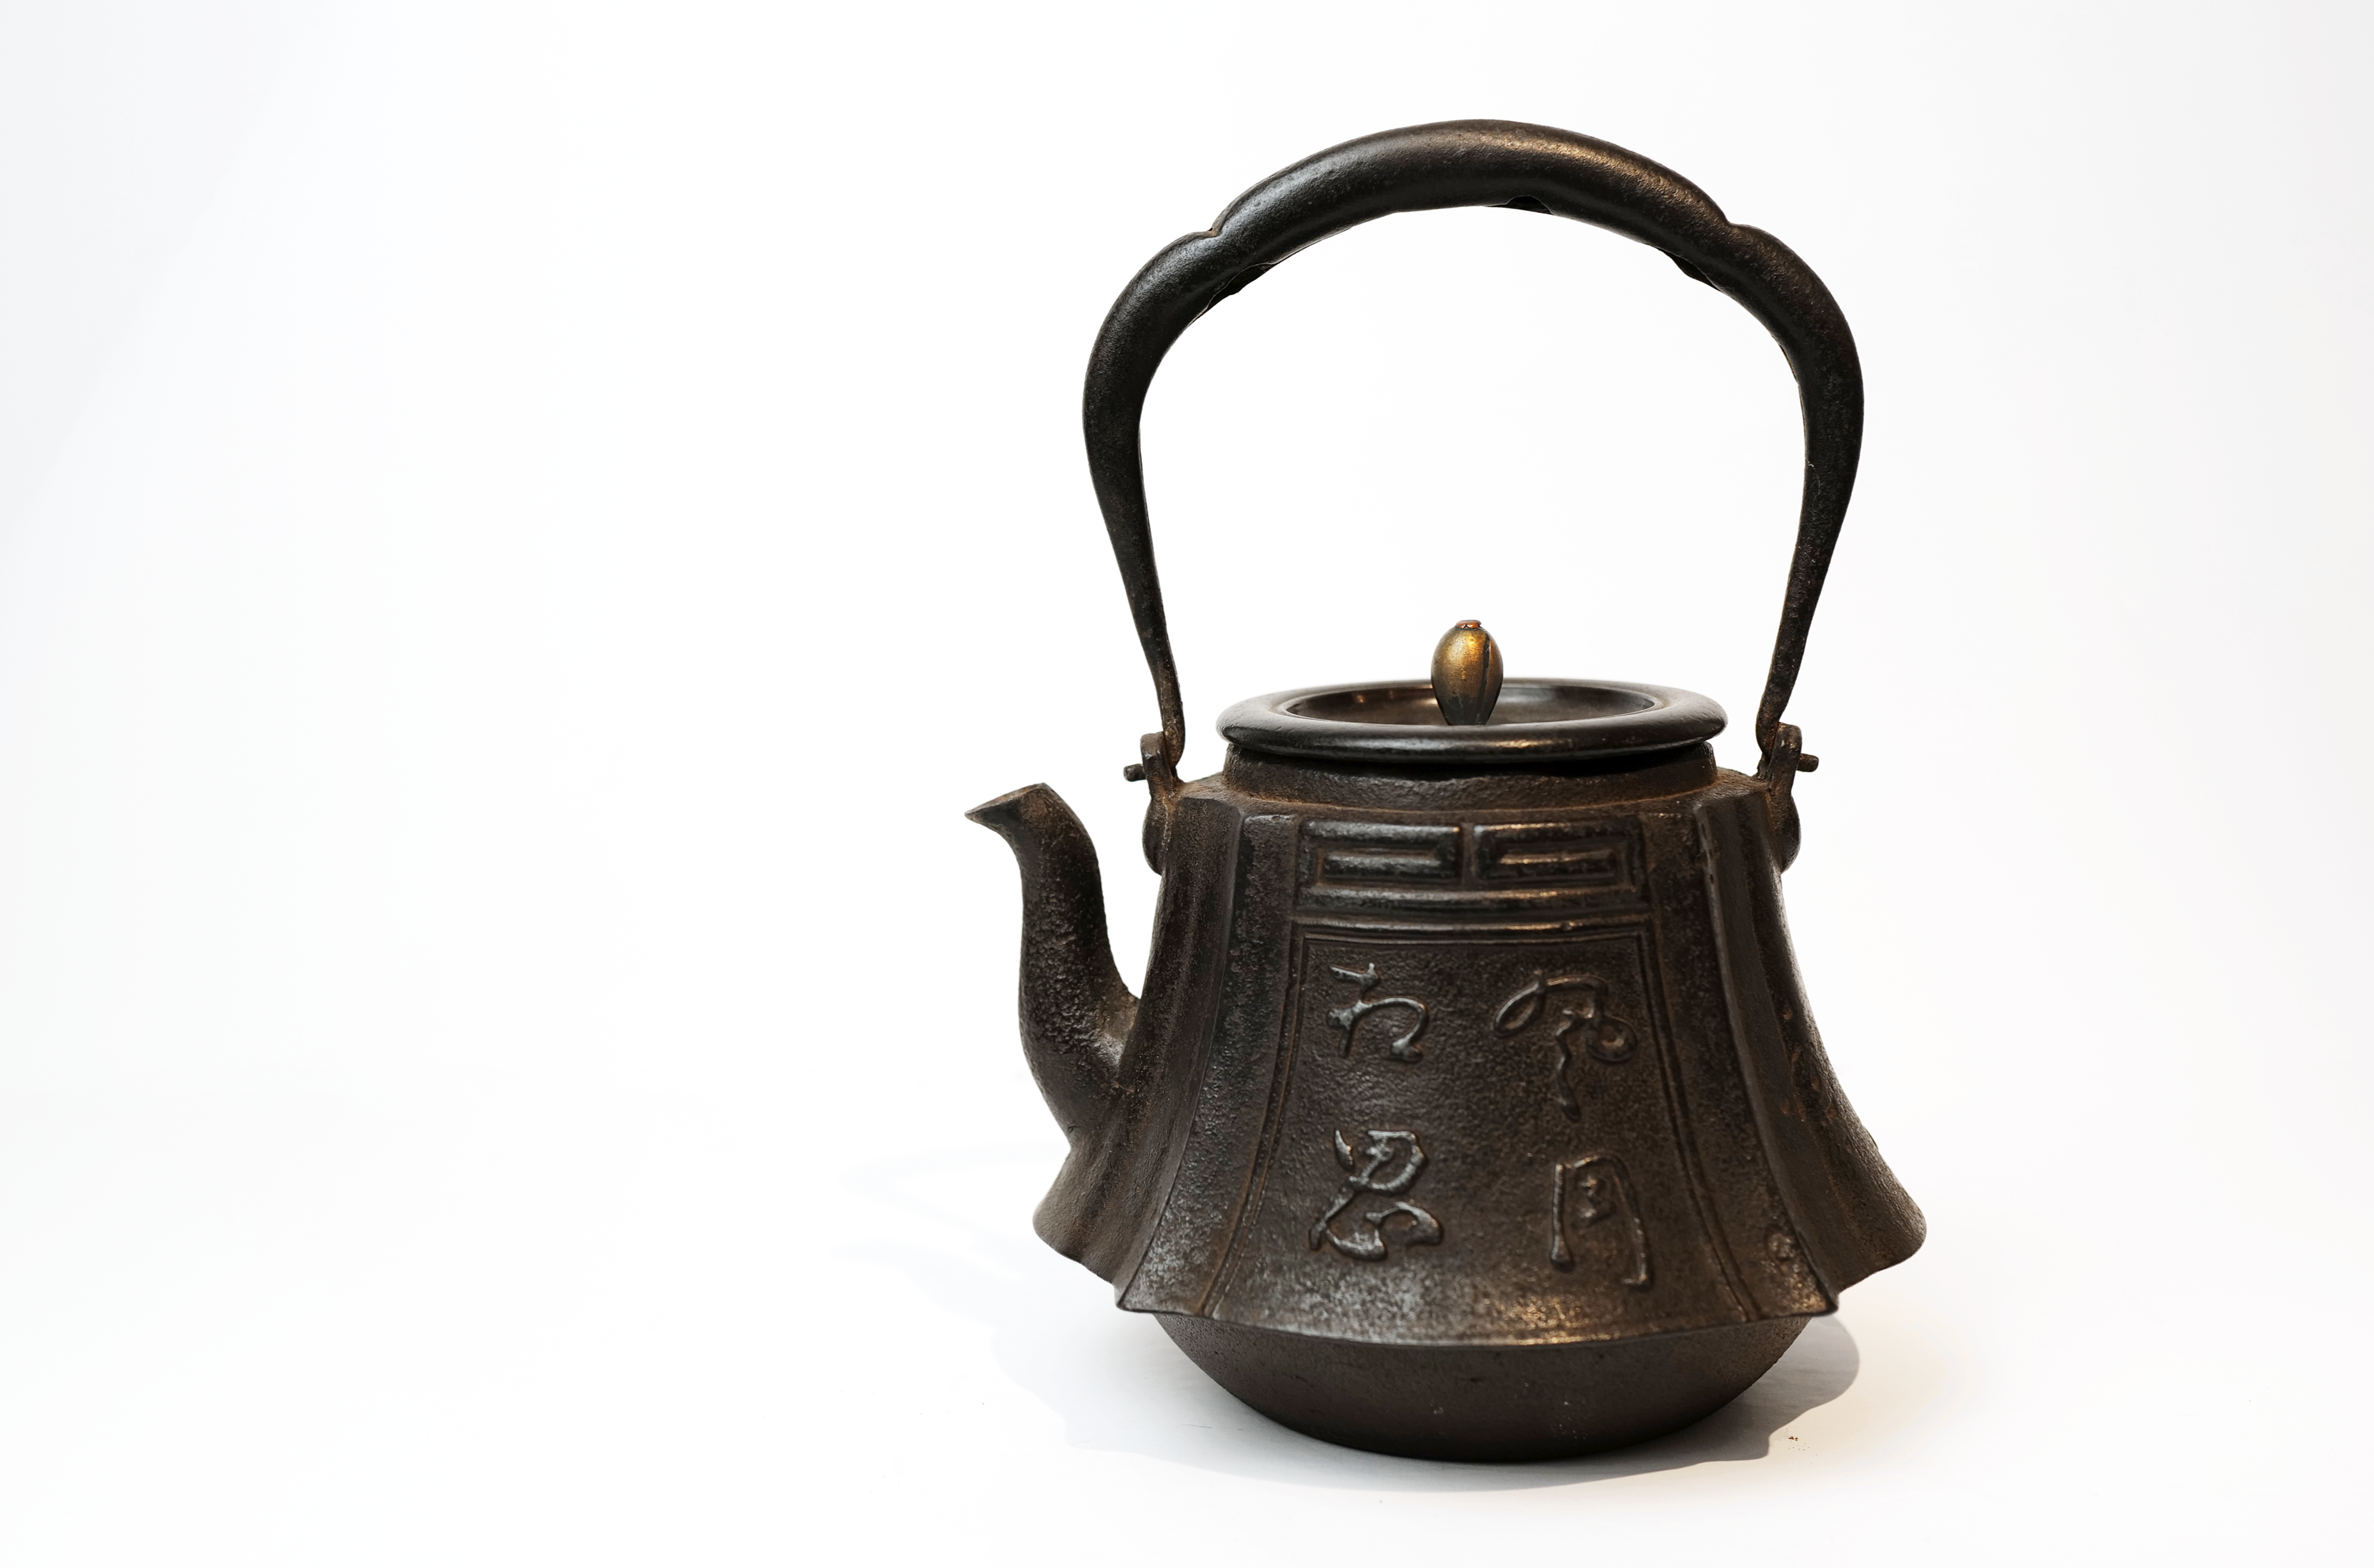 Ryubundo Gold Mounted Kettle Pot with Pattern of Figures and Kanji Character【龙文堂·风月乡思】